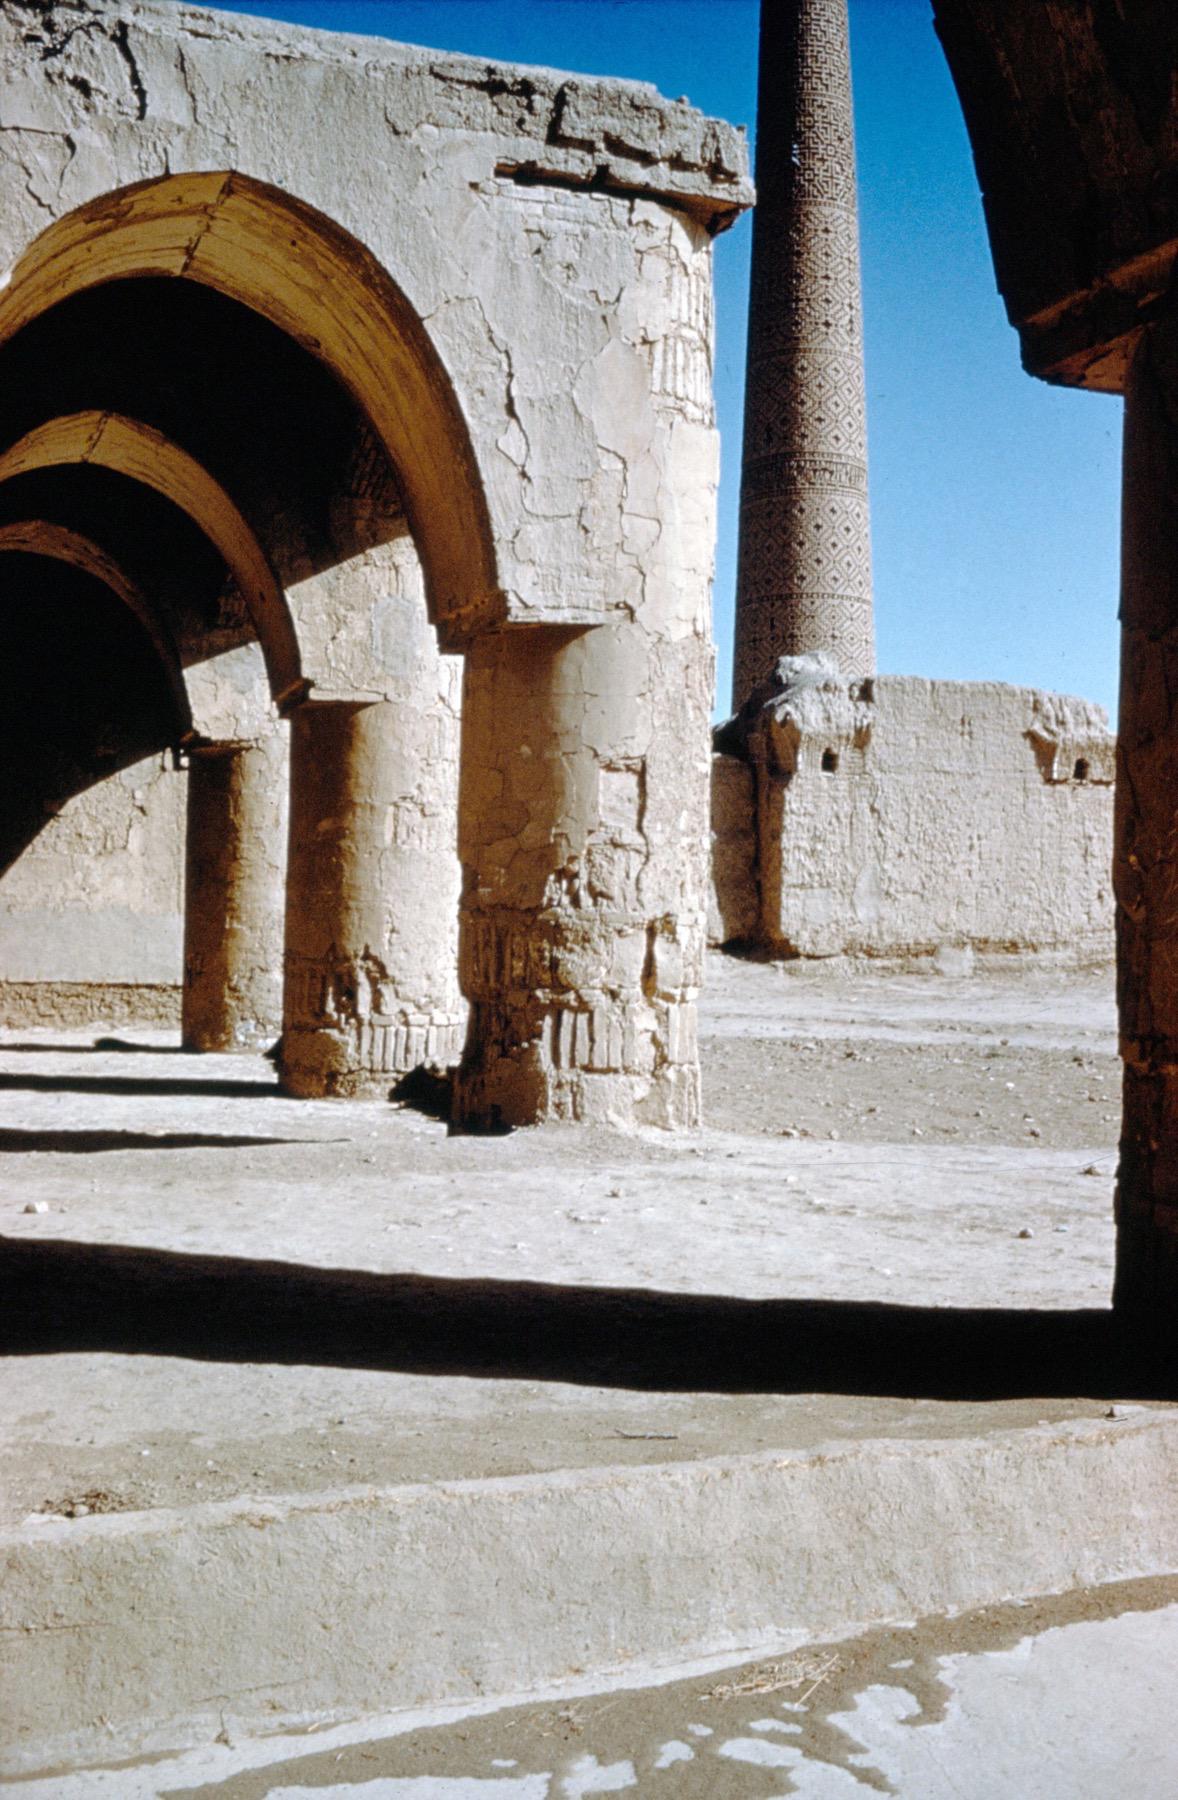 Interior view of qibla arcade with cylindrical pillars and elliptical arches, prior to restoration. The Seljuk minaret is visible in the background